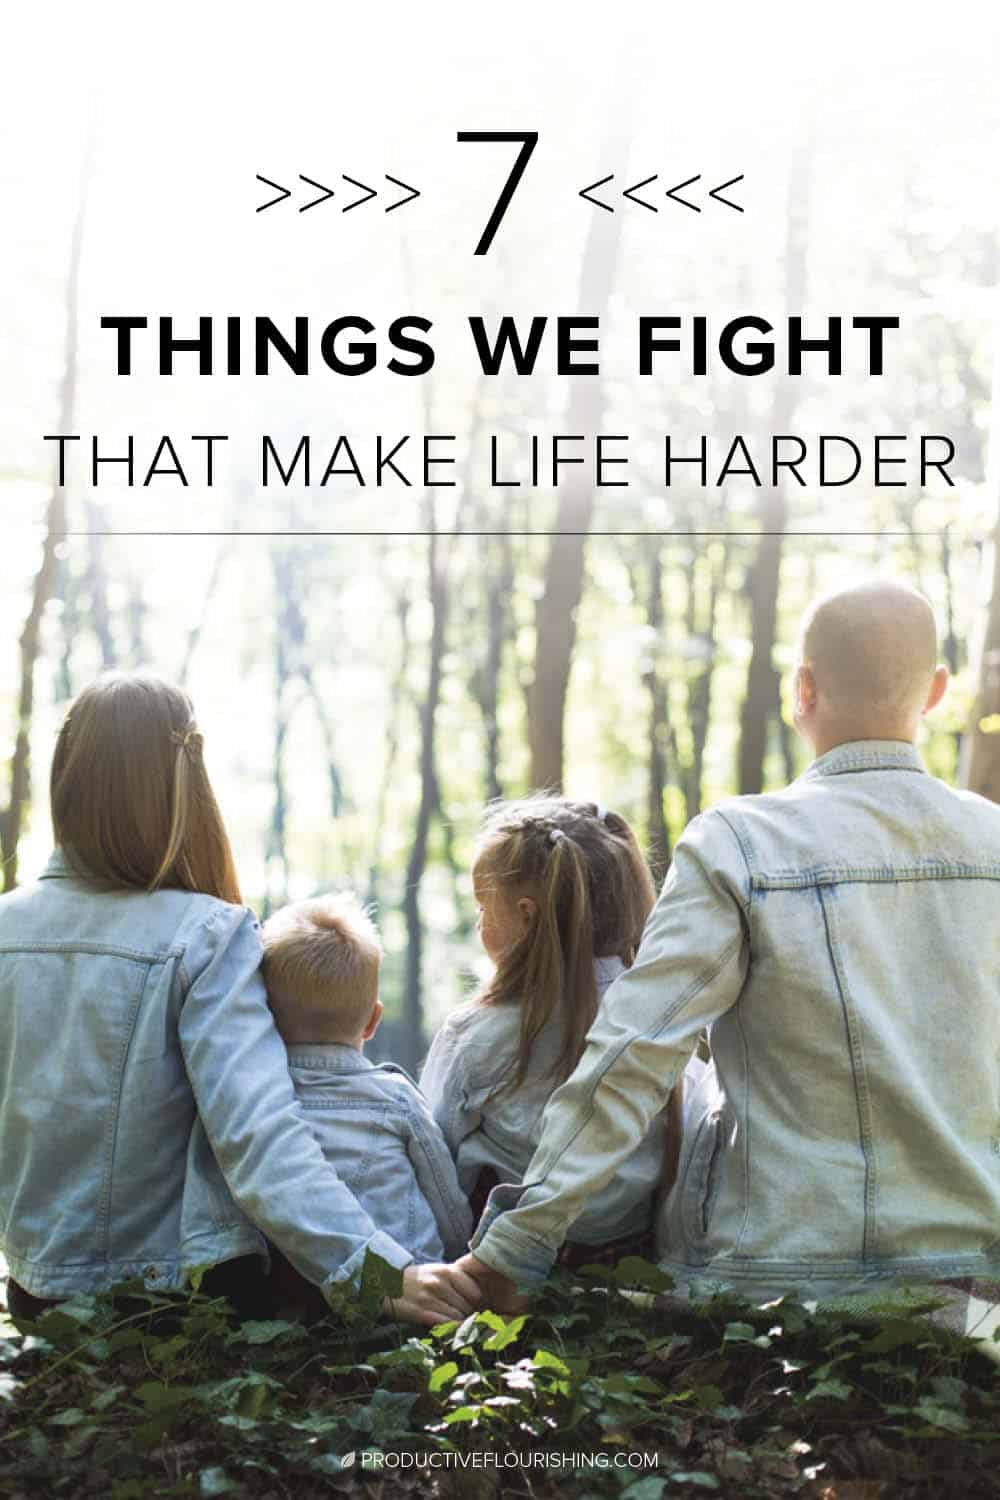 Learn how to recognize that you’re making things way harder than it needs to be; and how to stop fighting it. We fight things we shouldn’t and it makes our life harder. #productiveflourishing #successfulmindset #entrepreneur